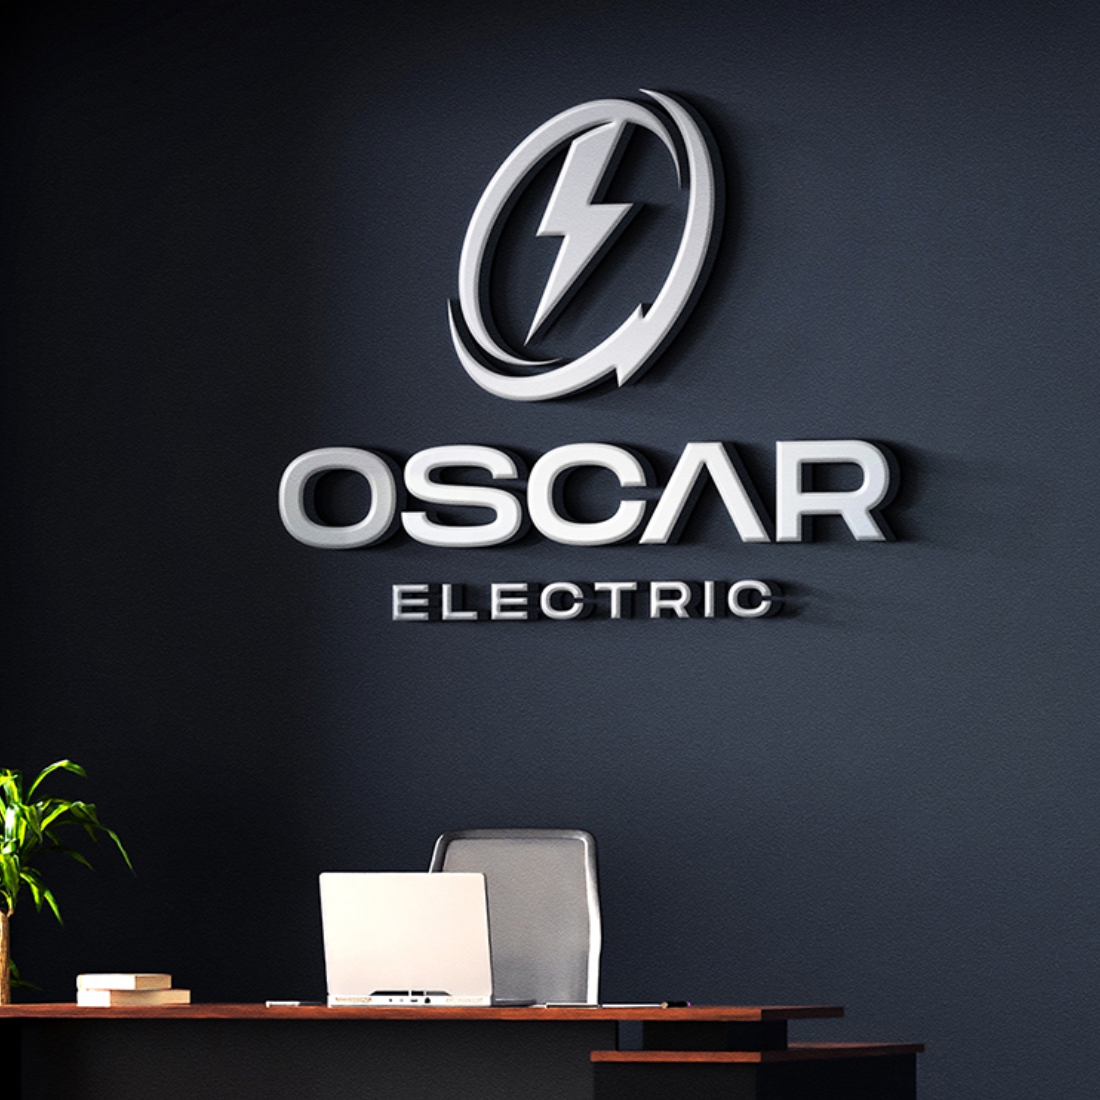 Modern And Stylish Electric Logo Wall Example.